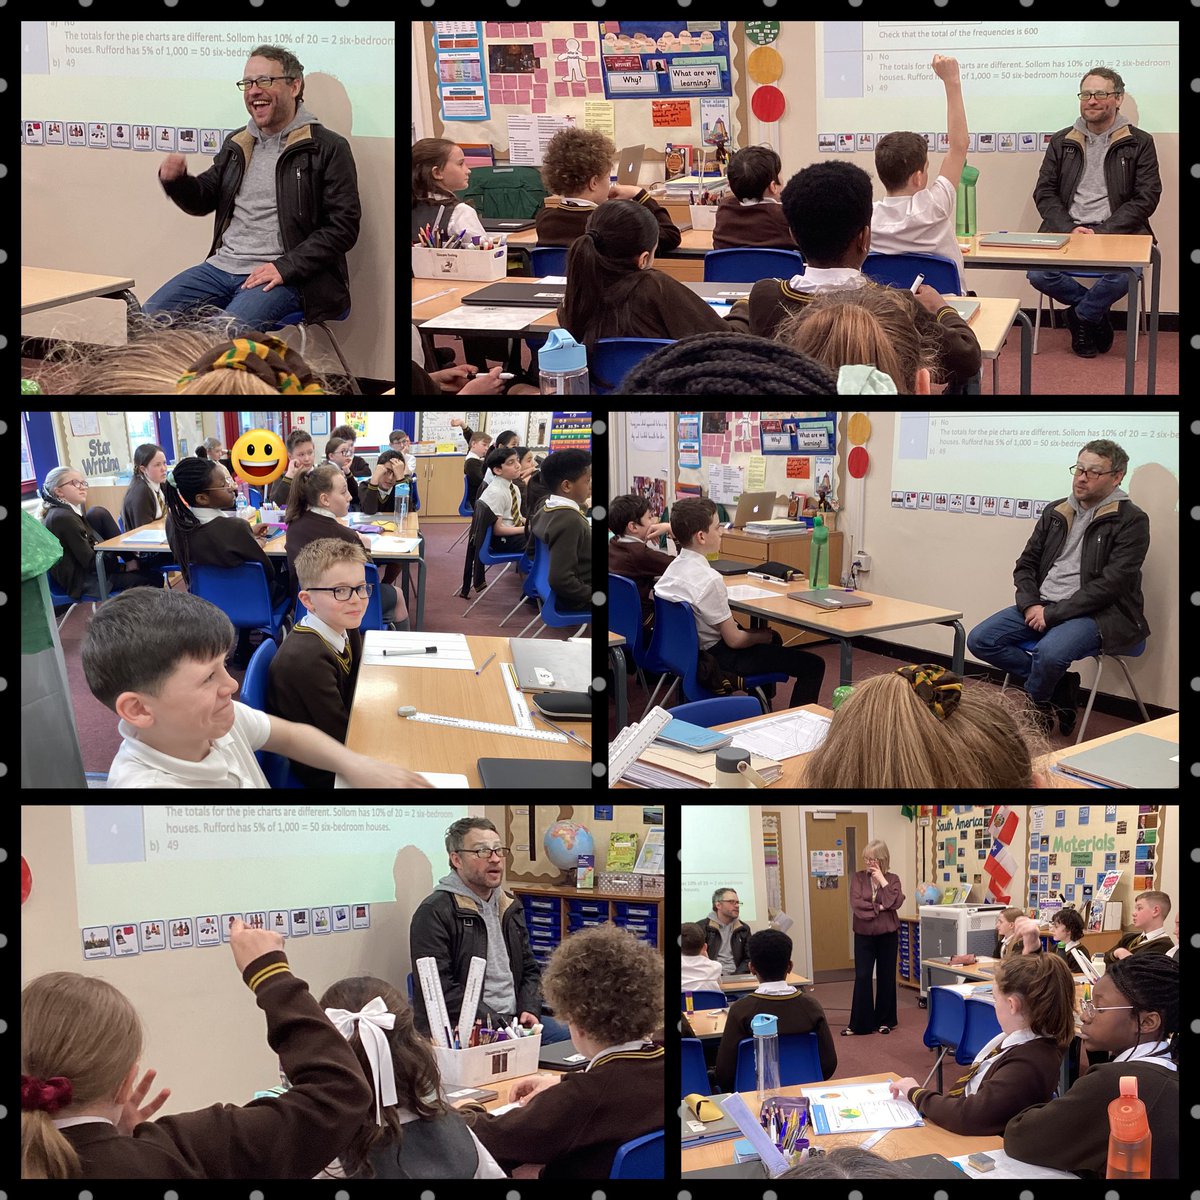 We had a lovely visit from Peter Ash, this morning, who came to do a question and answer session. Thank you @PeterAsh_85 for talking about your acting career and your motivations to fulfil your dreams.

#StHerbertsStrongInFaith
#StHerbertsPSHE